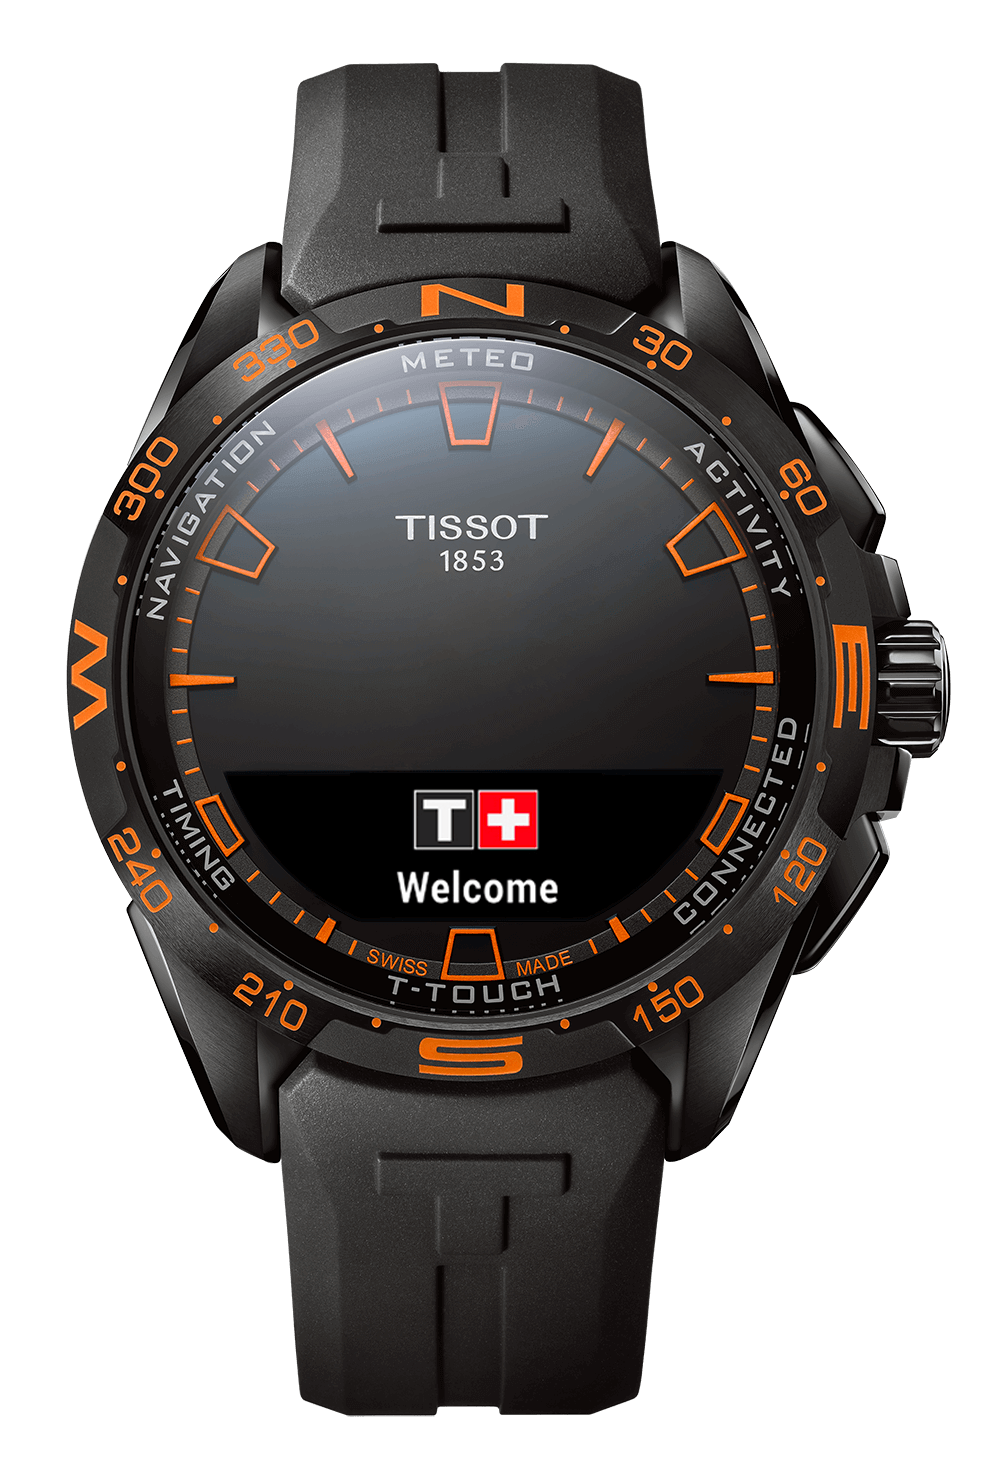 TISSOT ティソ 腕時計 T-TOUCH CONNECT SOLAR Tタッ